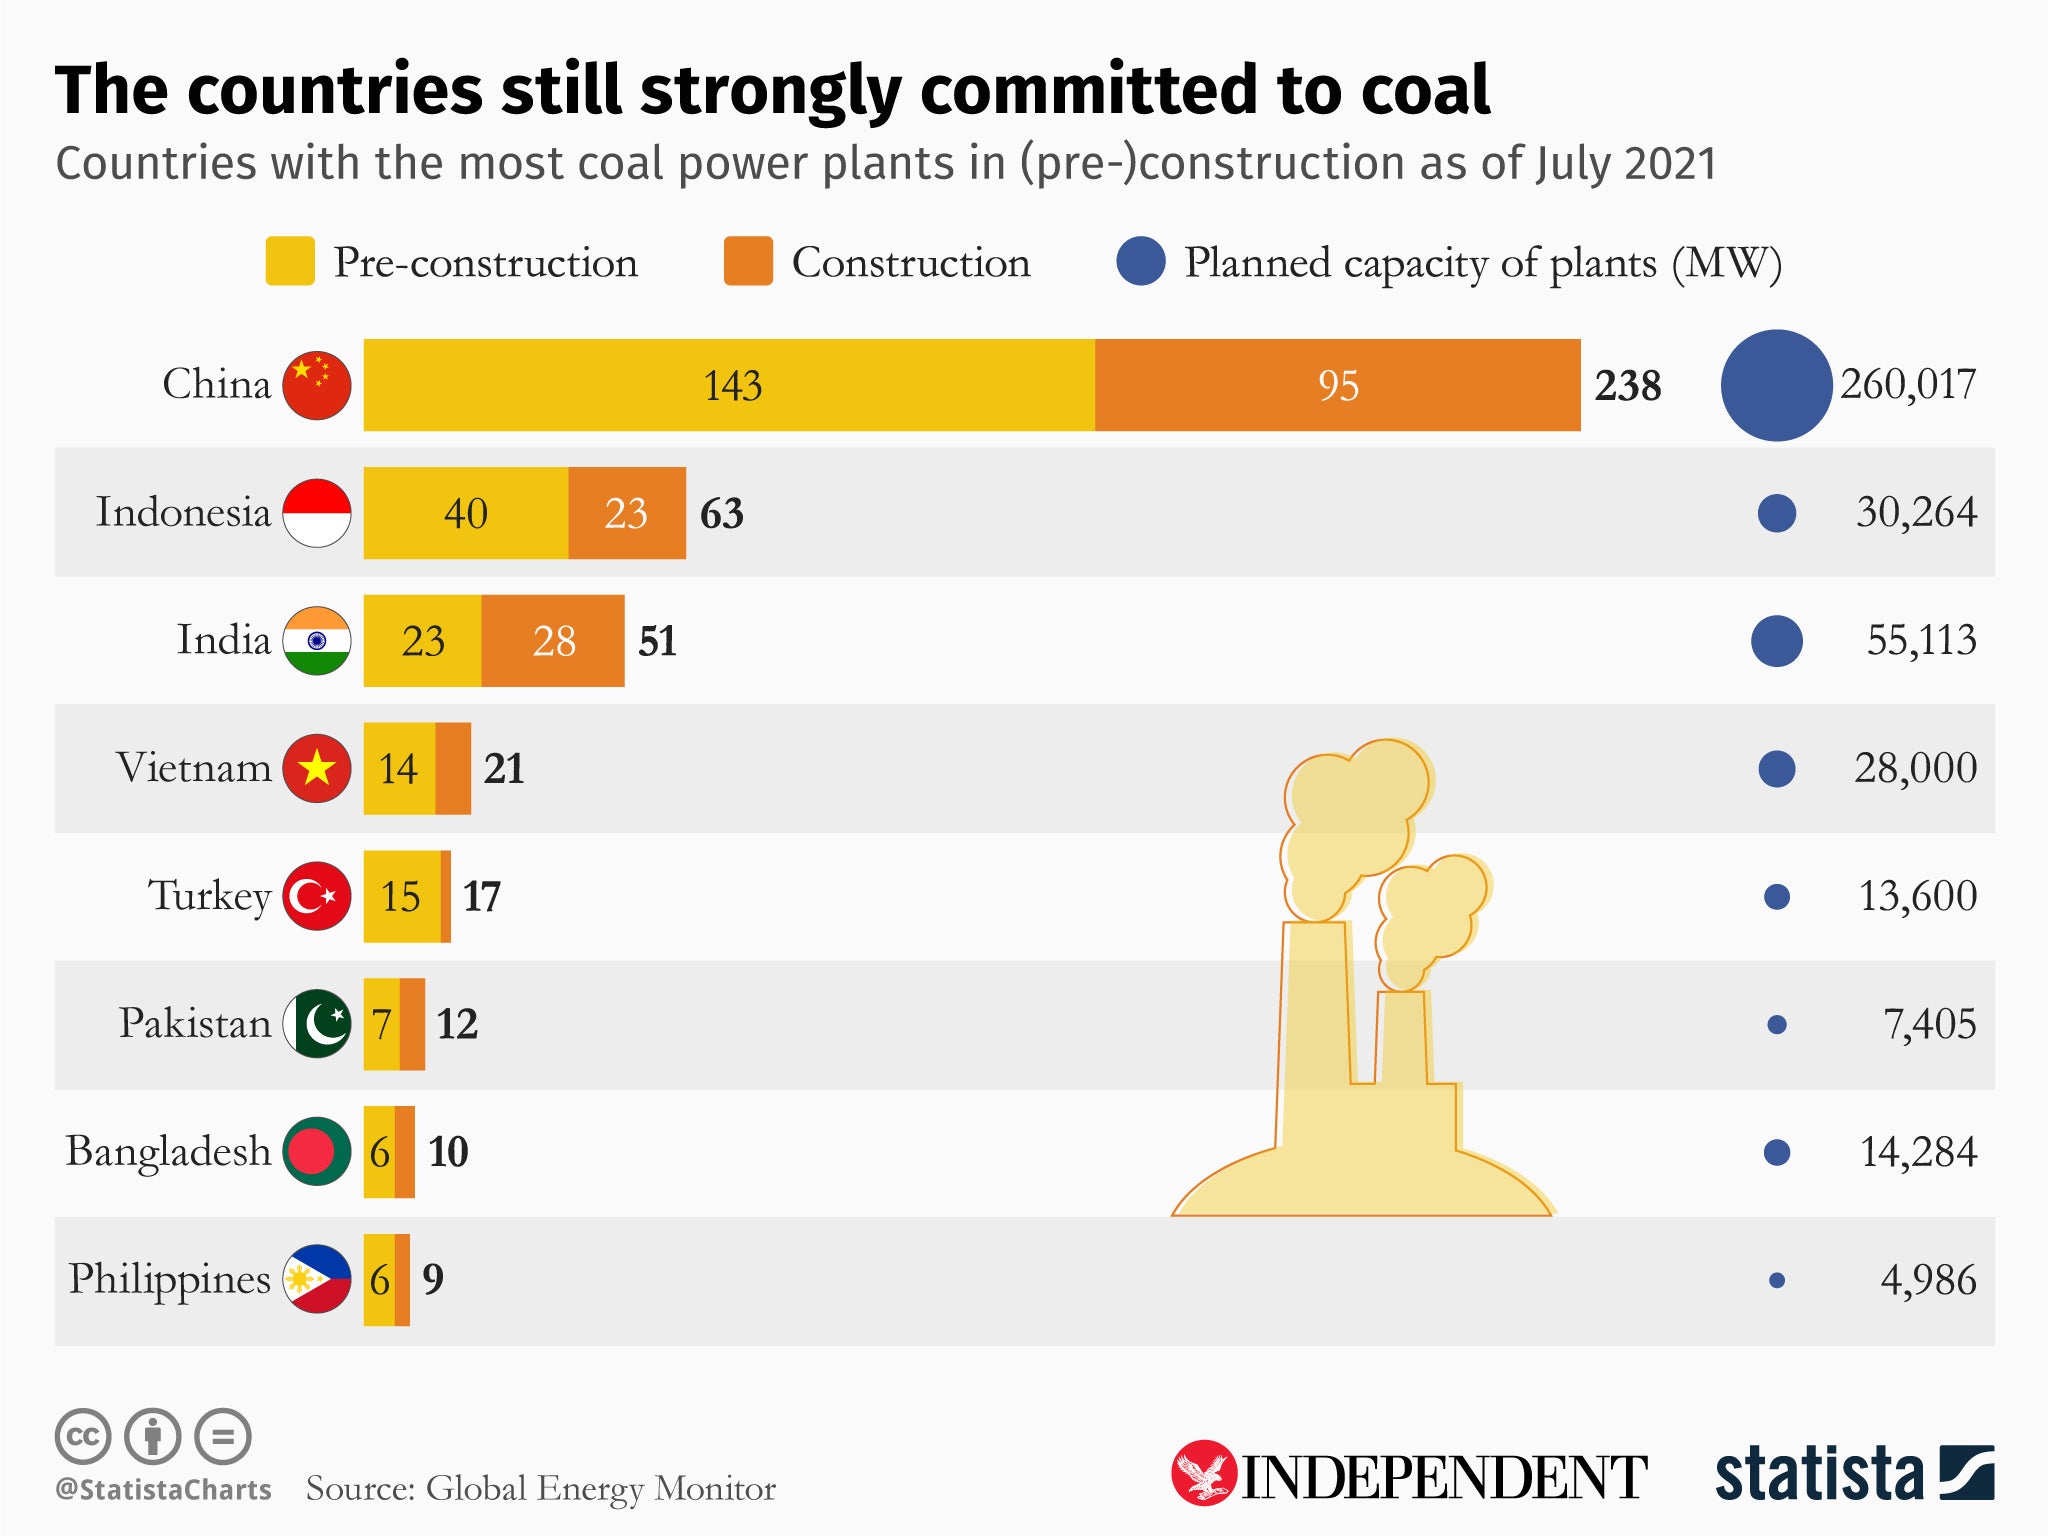 This graphic provided by Statista shows India’s heavy dependence on coal